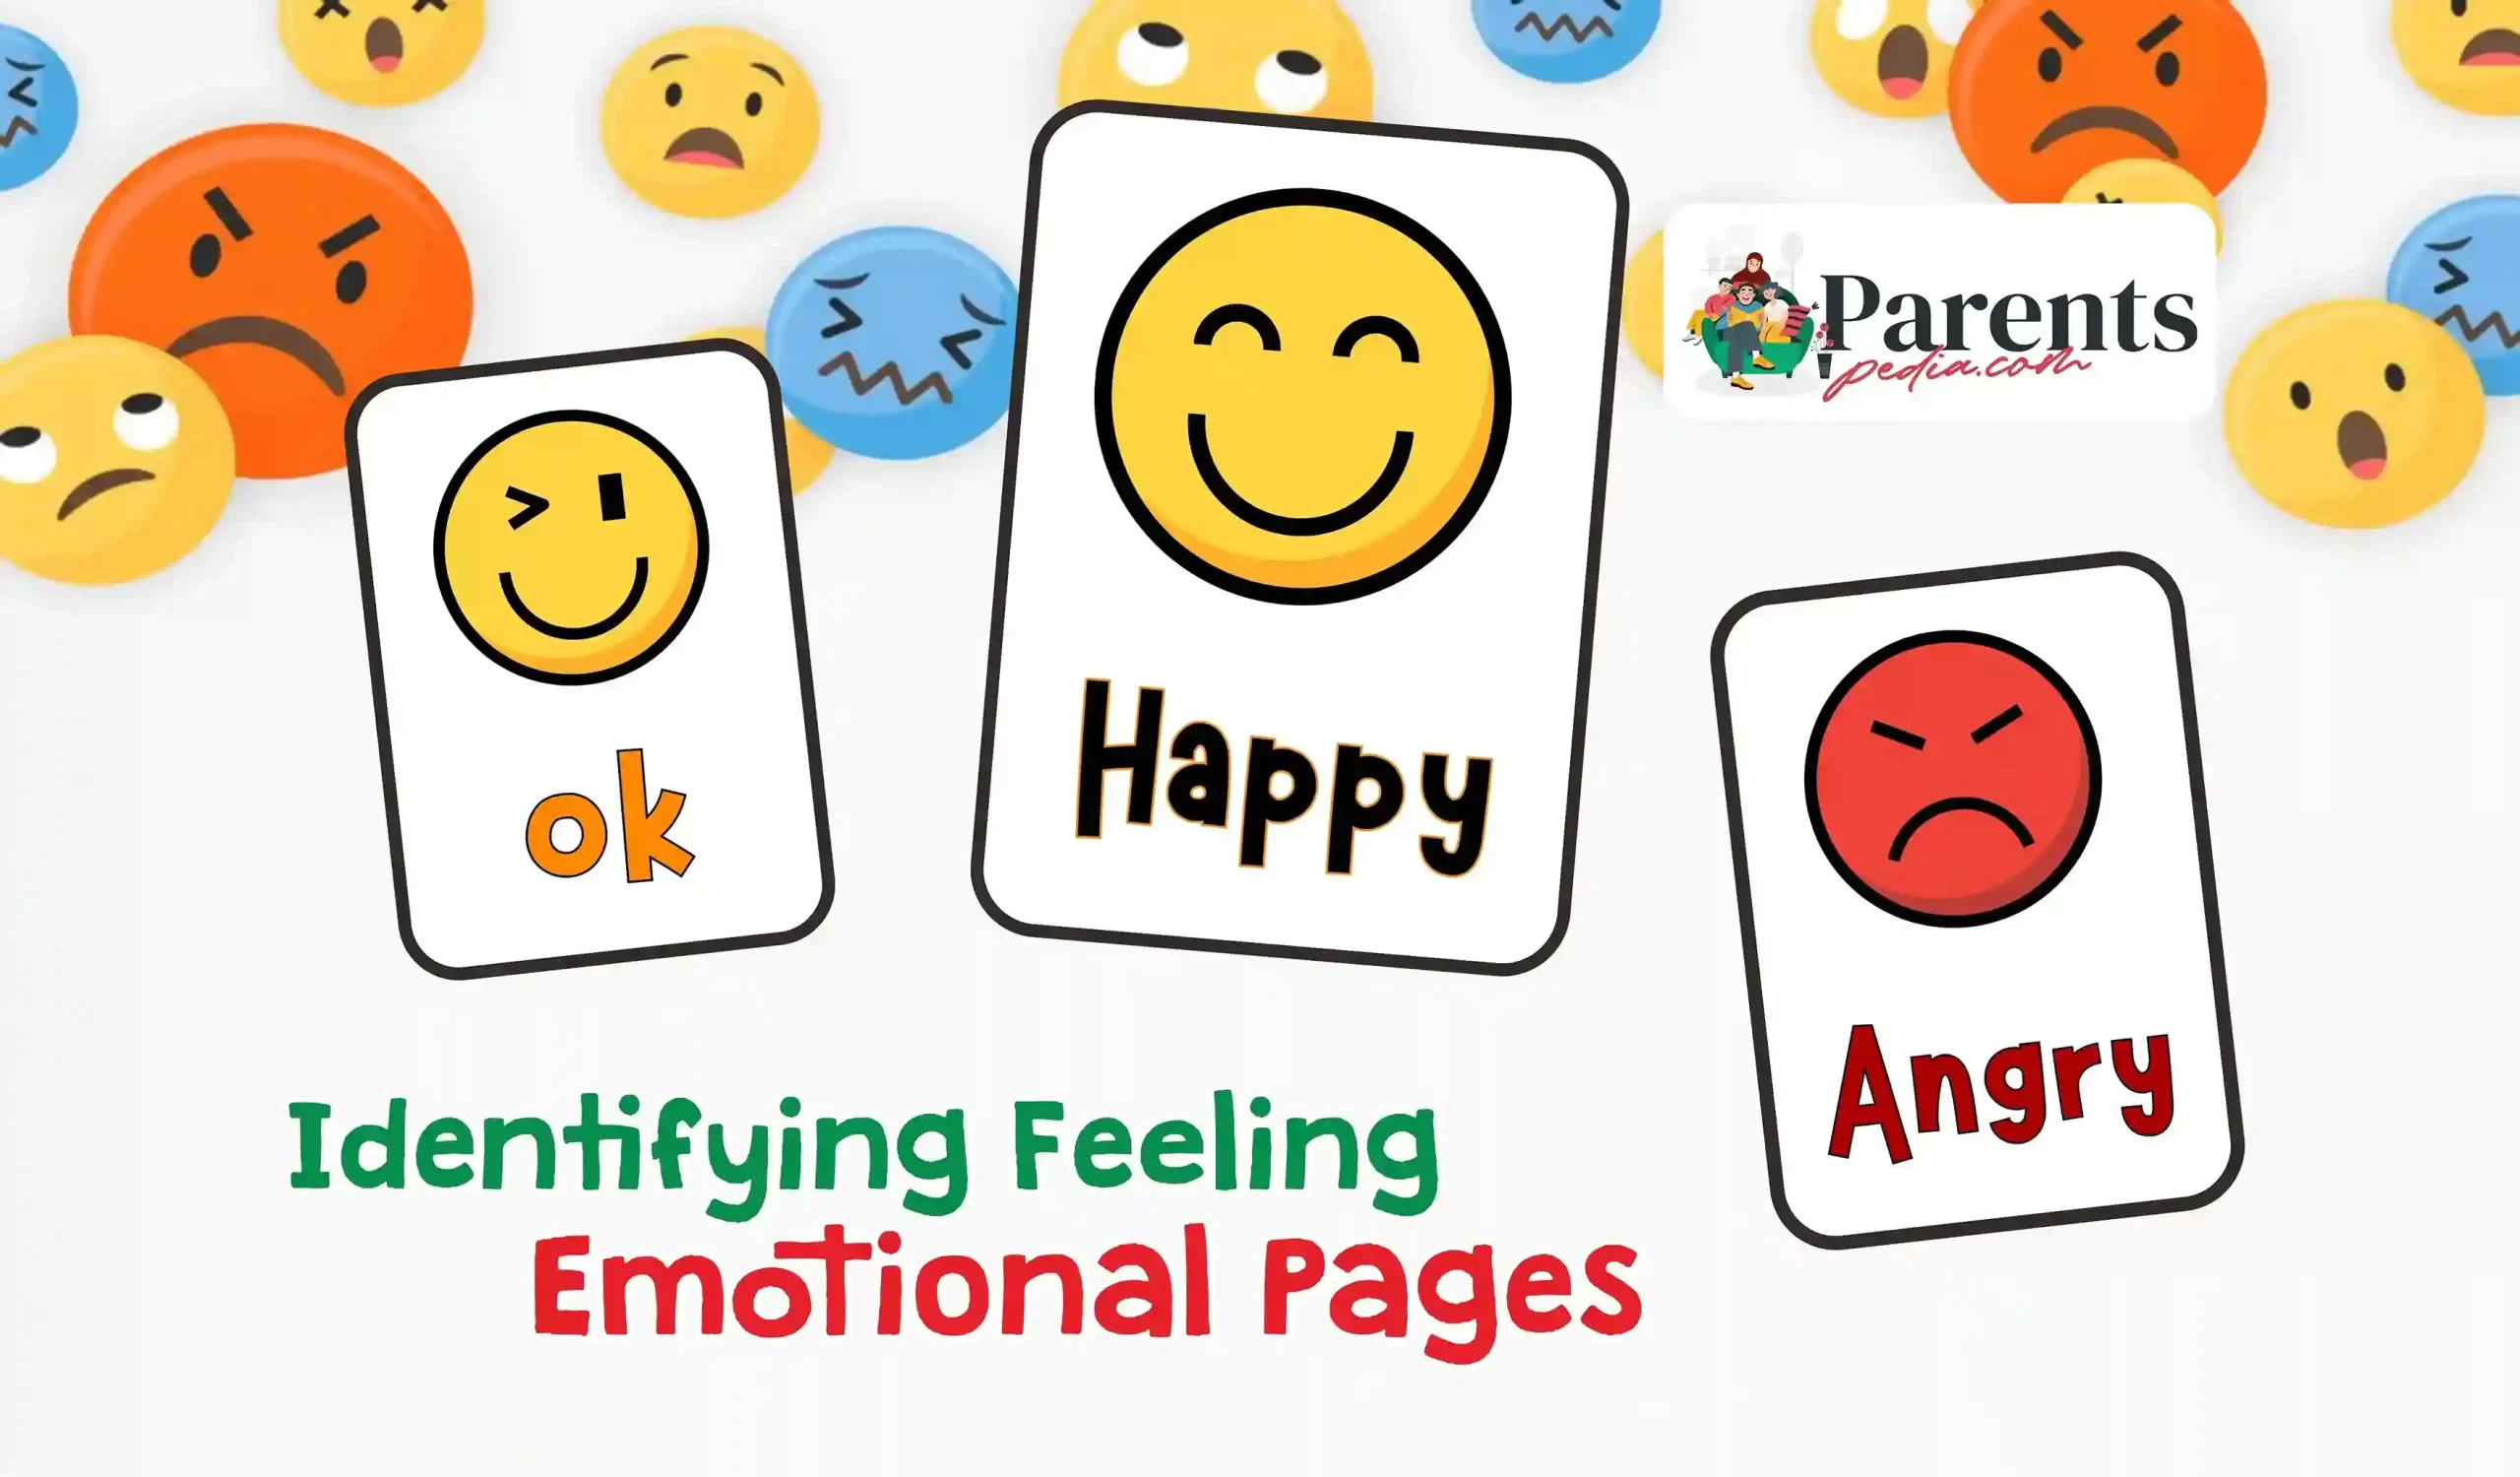 Identifying Feeling Emotional Pages